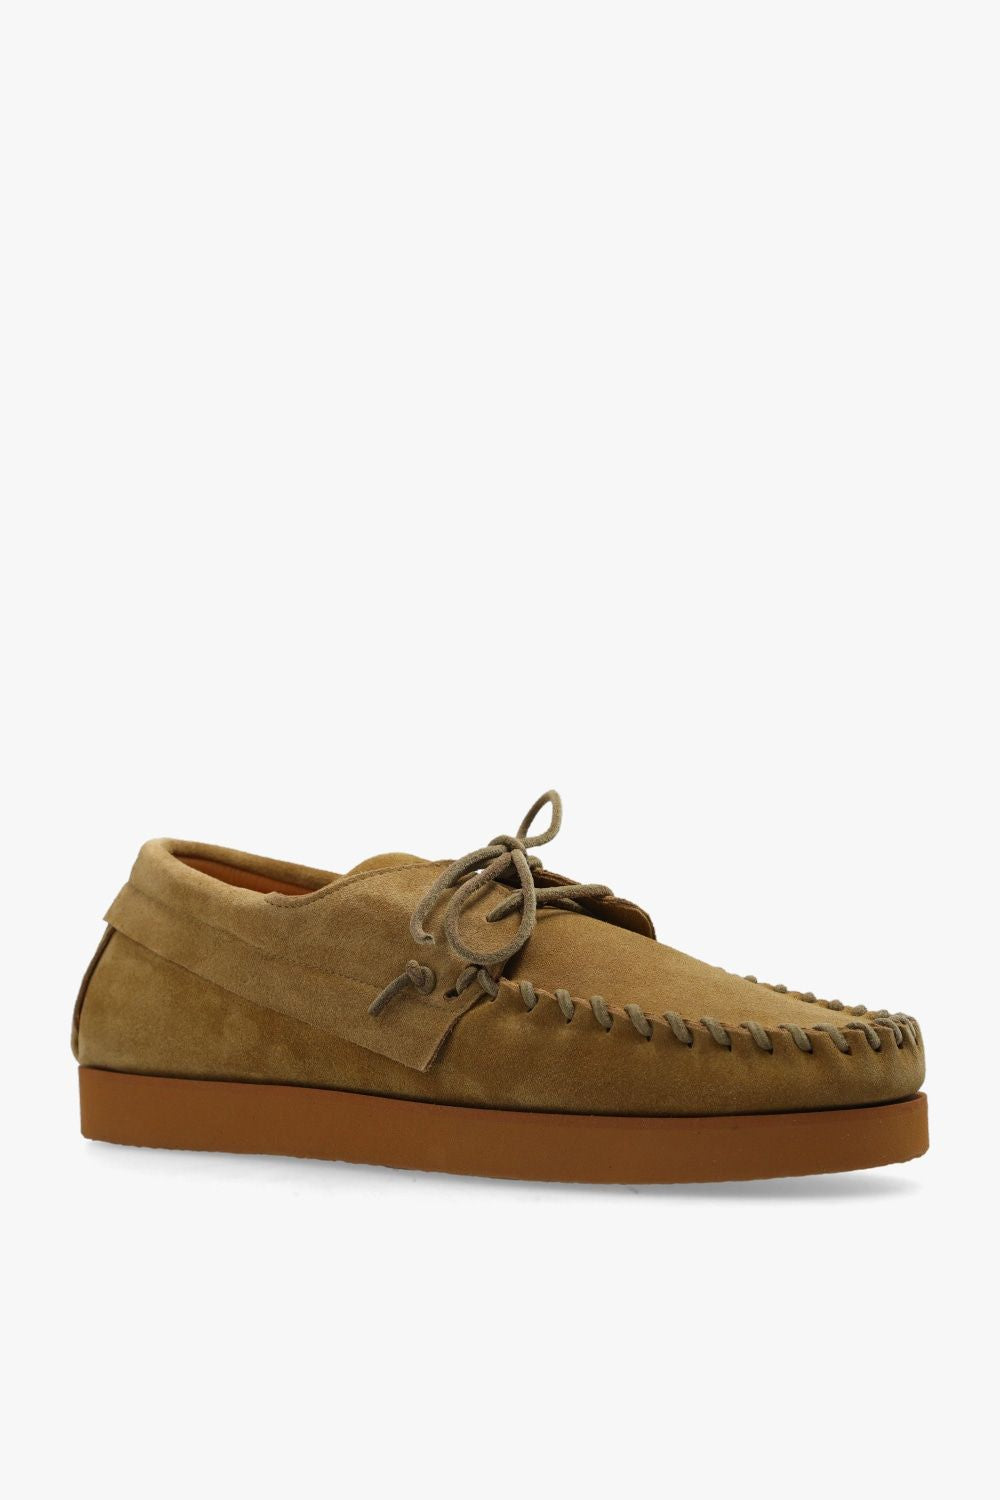 ISABEL MARANT Men's Taupe Leather Loafers for SS23